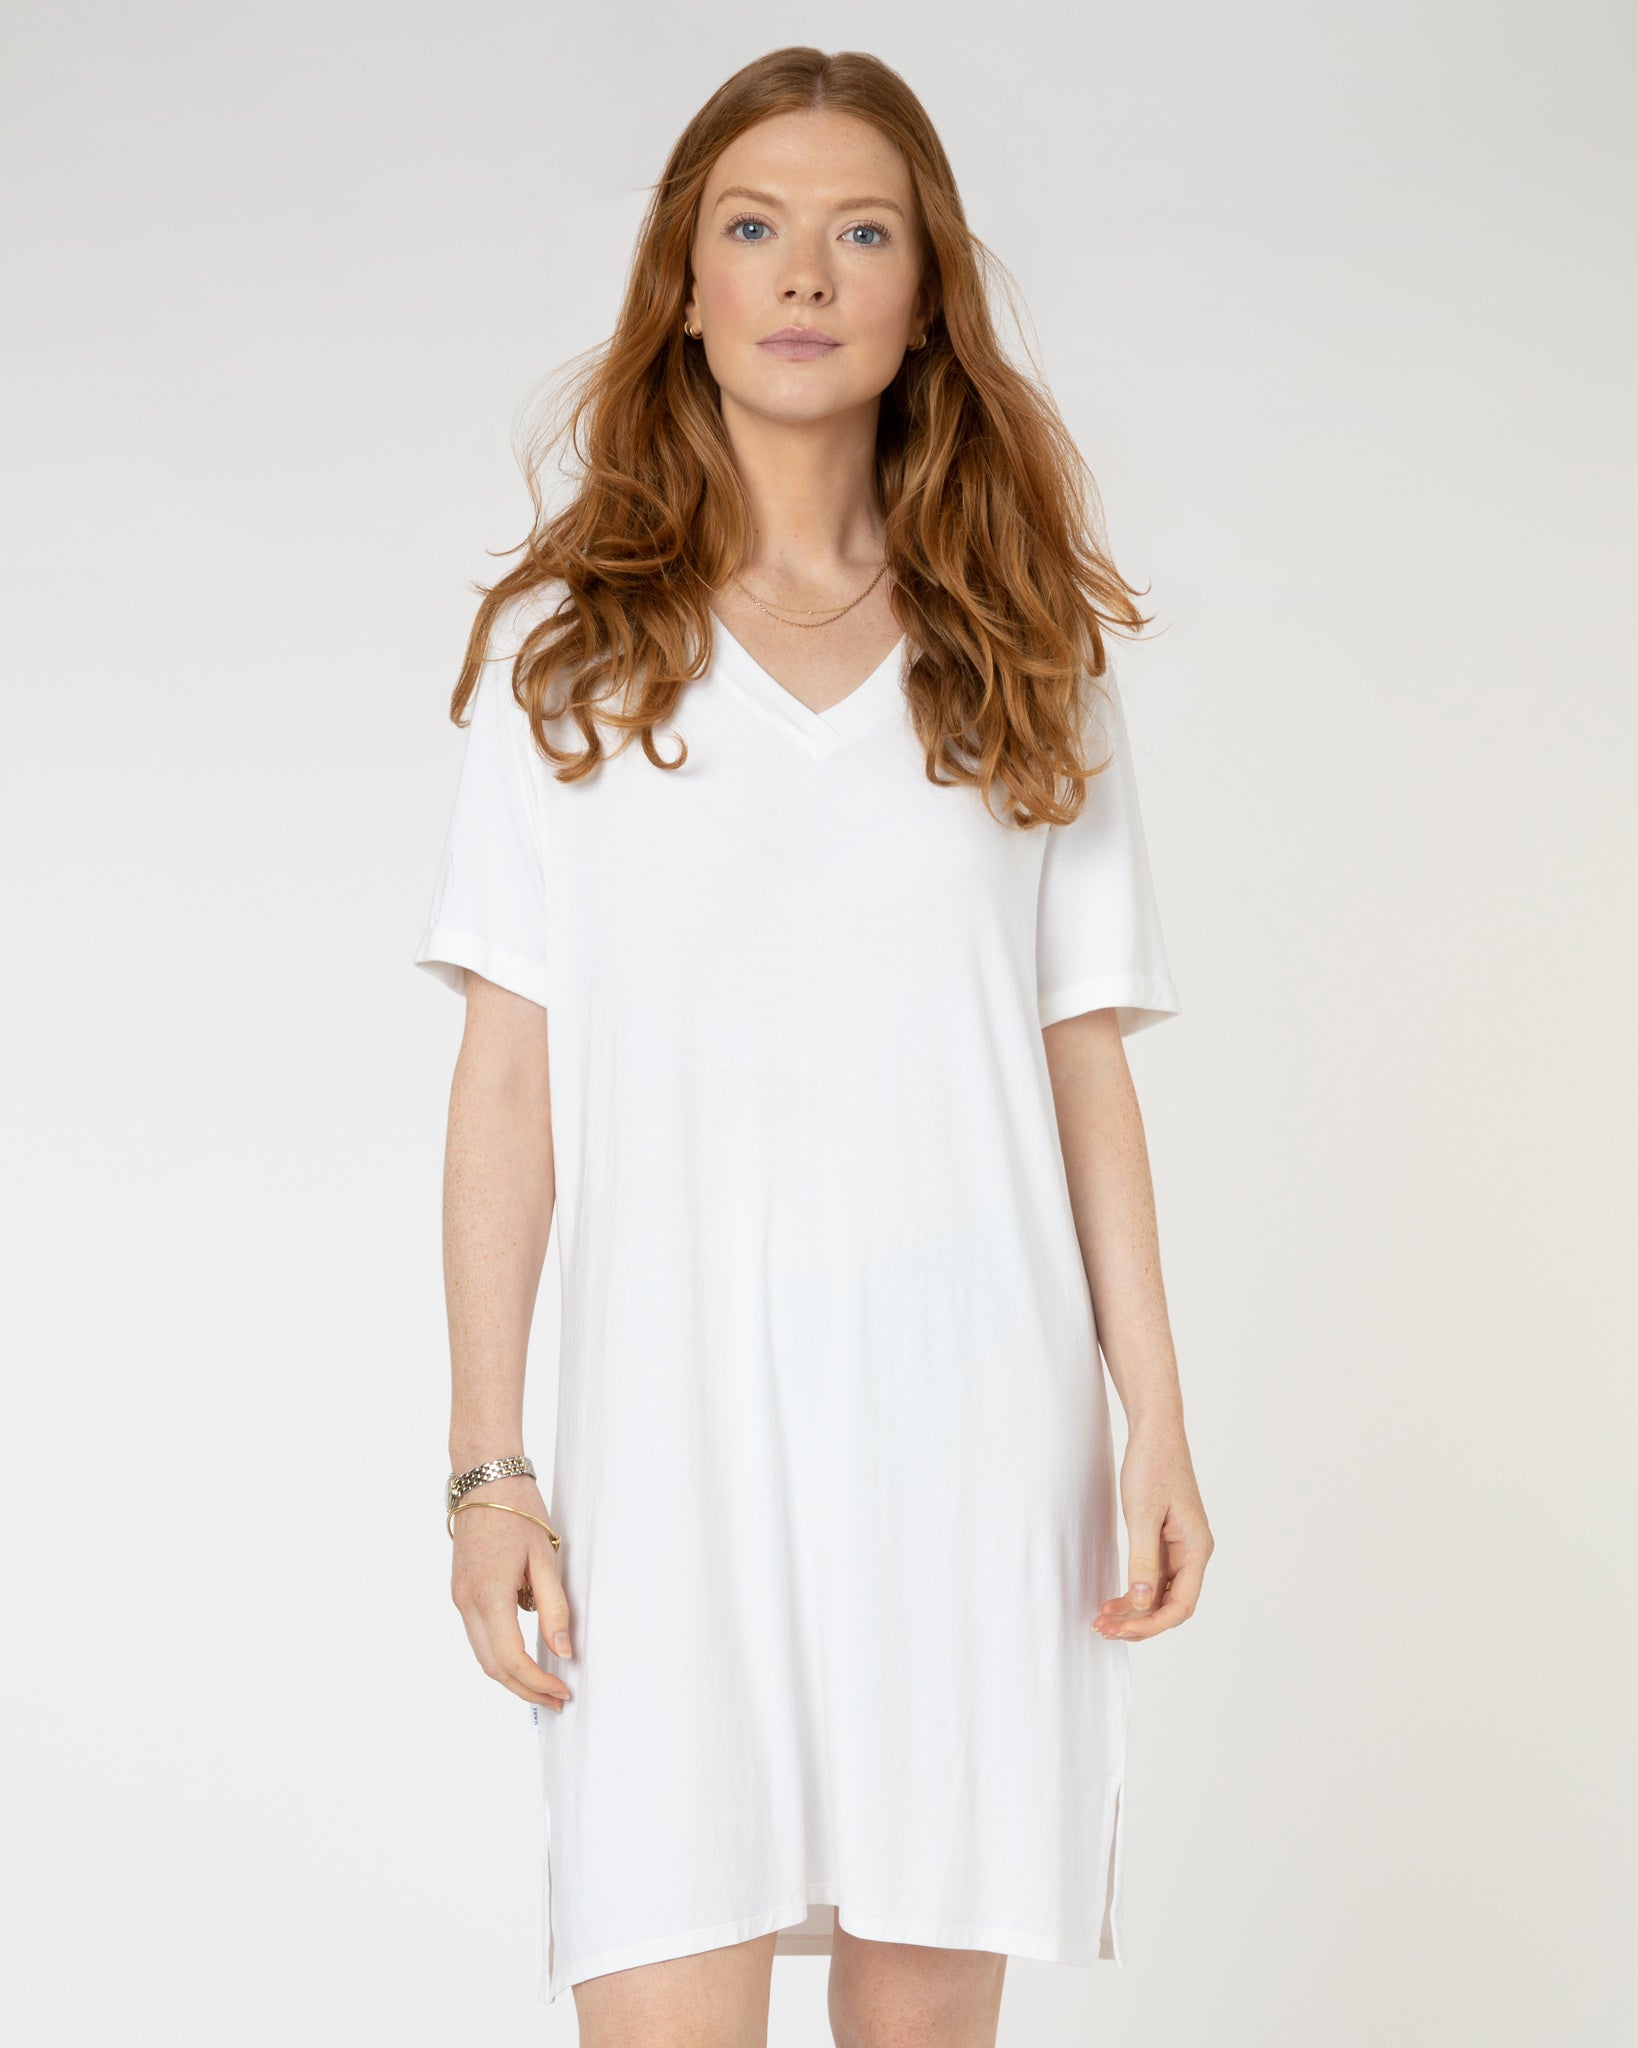 Woman wearing plain white V-neck jersey nightdress made of micromodal fabric from Yawn.